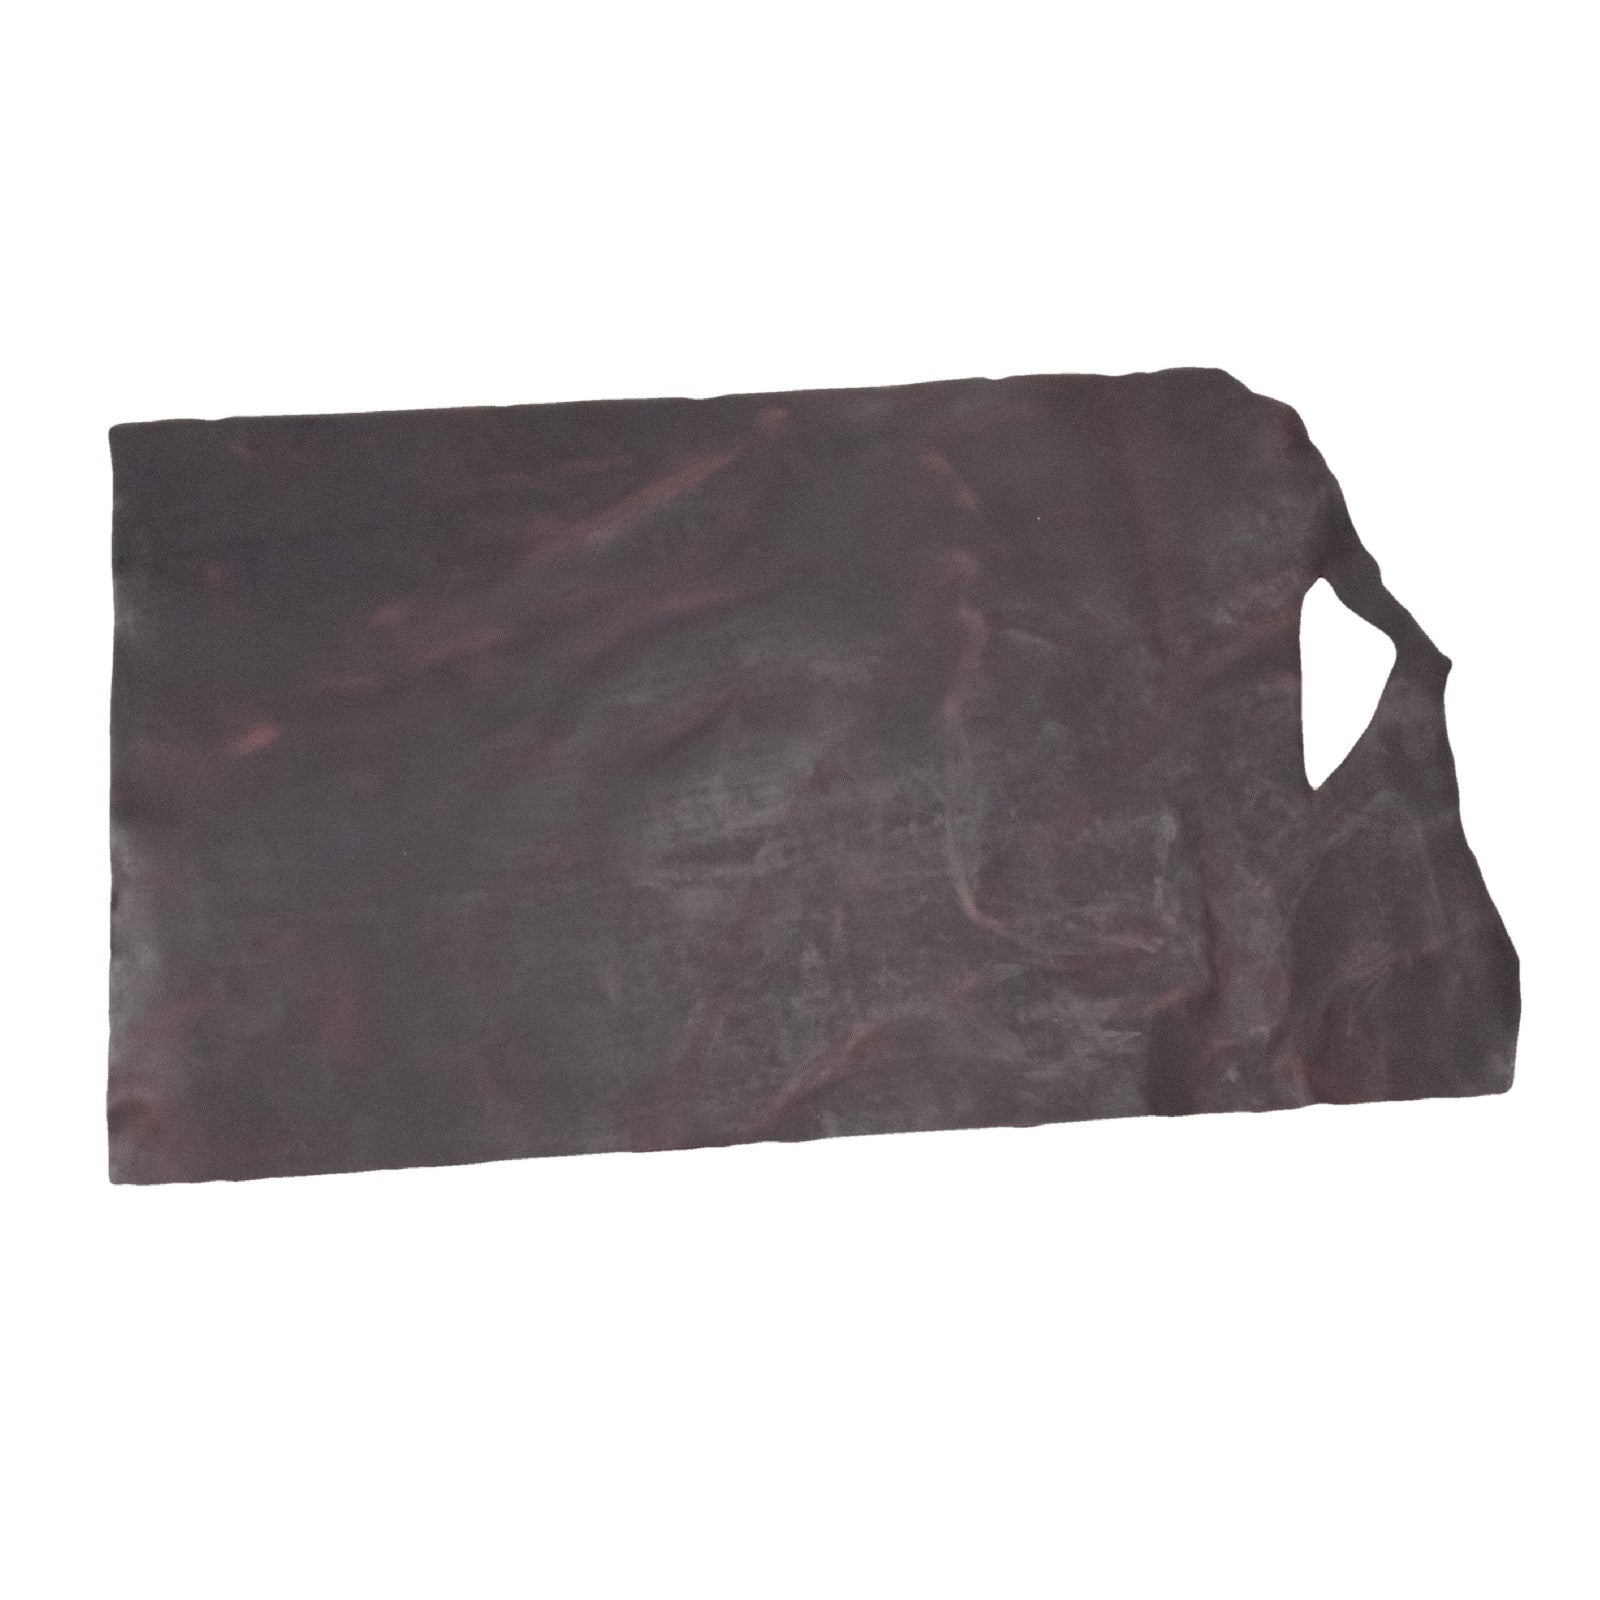 Excalibur (Black Cherry), SB Foot, Non-stock, 5-6 oz, Oil Tanned Hides, Middle Piece / 6.5 - 7.5 Sq Ft | The Leather Guy